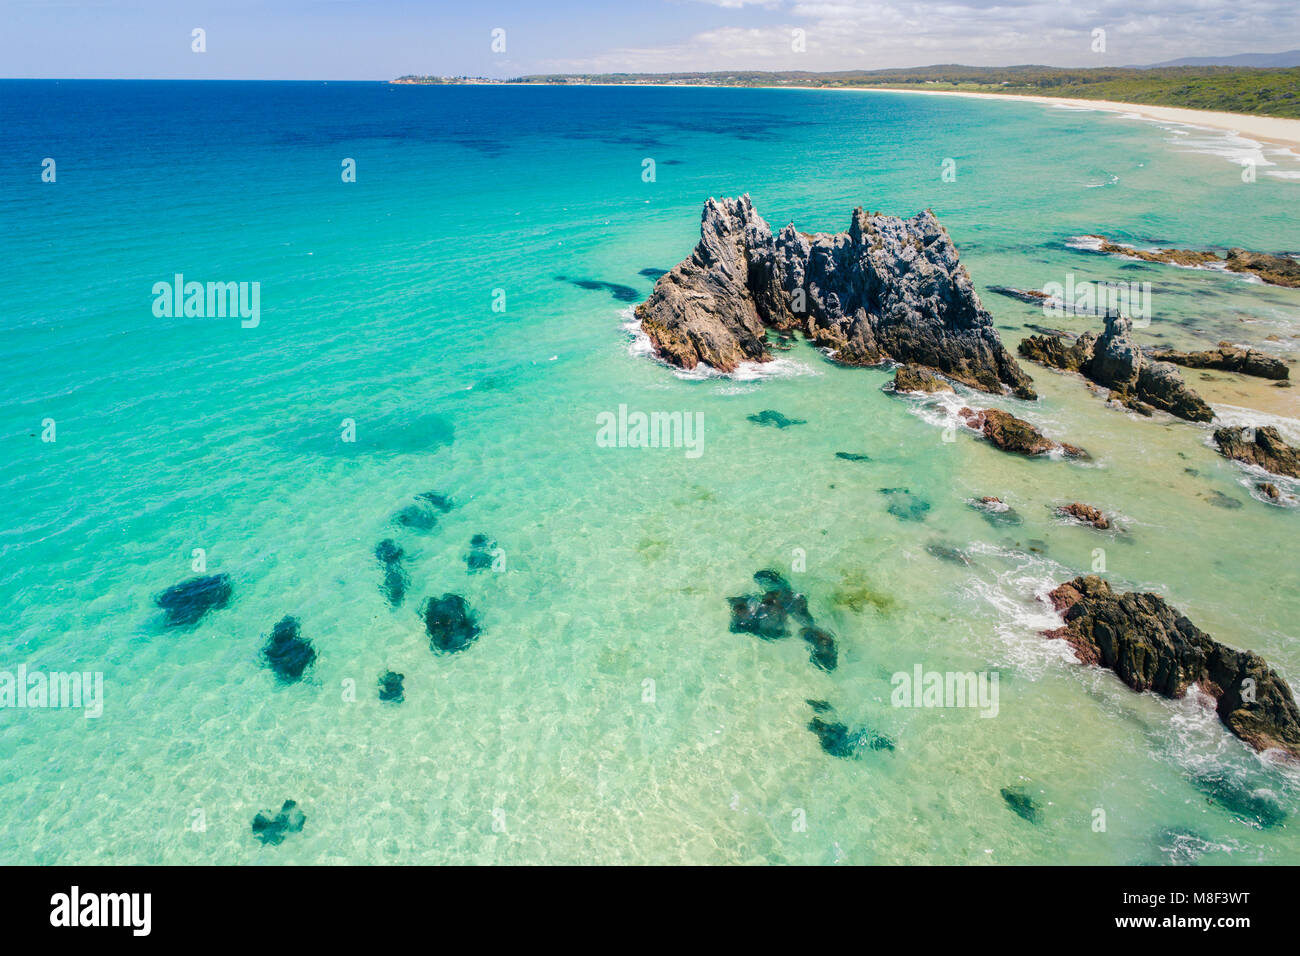 Australia, New South Wales, Bermagui, Turquoise sea with rock formation and coastline in background Stock Photo